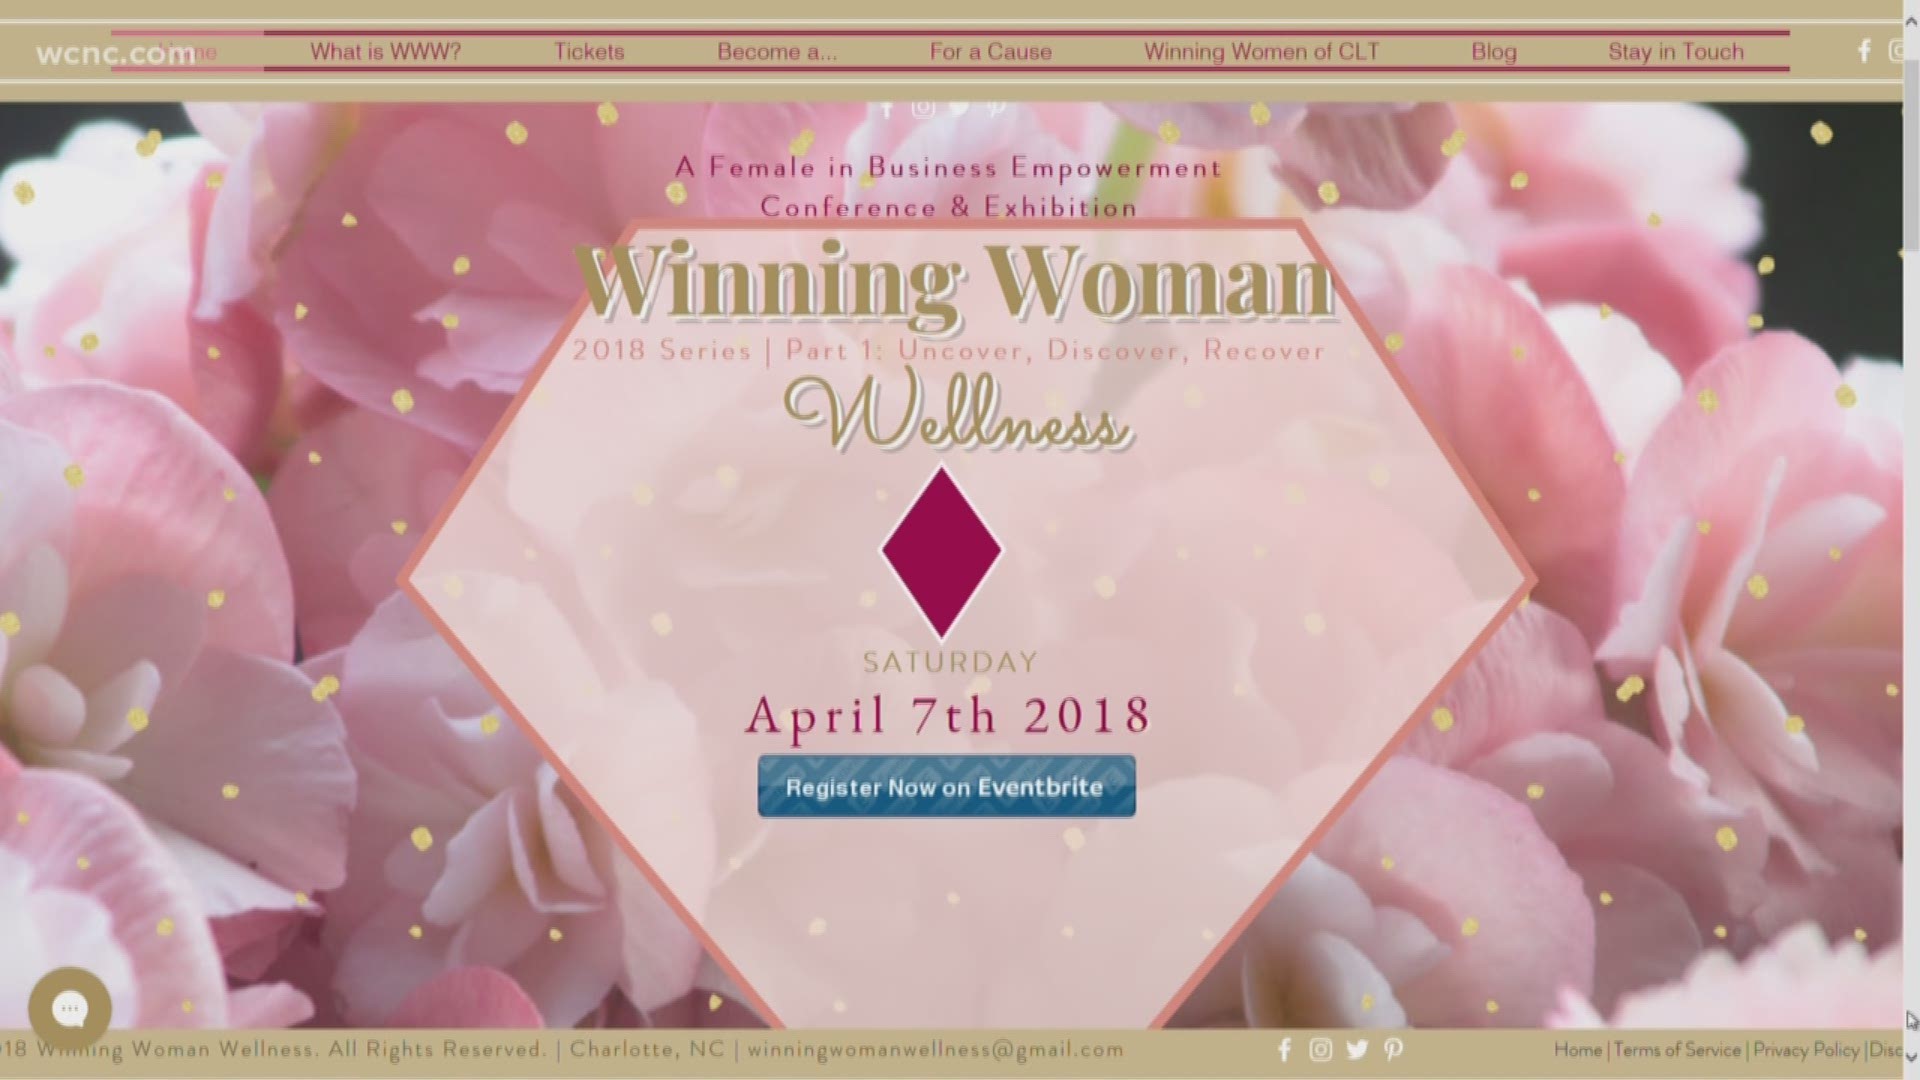 The conference, designed to help women uncover, discover and recover their passion will be in held Charlotte April 7